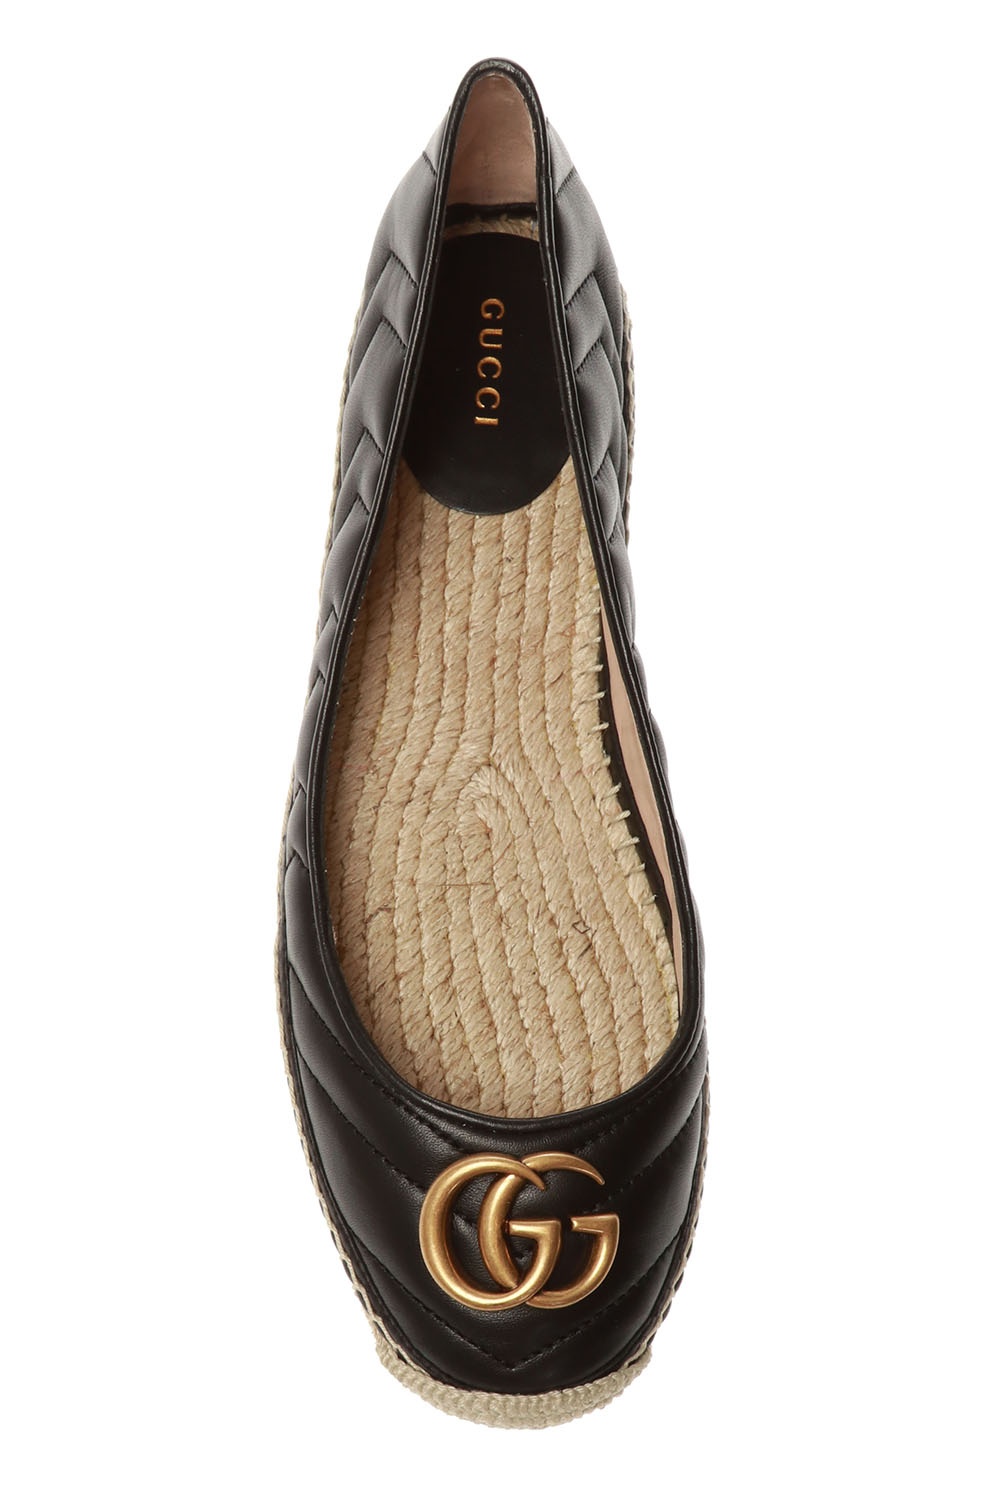 gucci Beige Quilted espadrilles